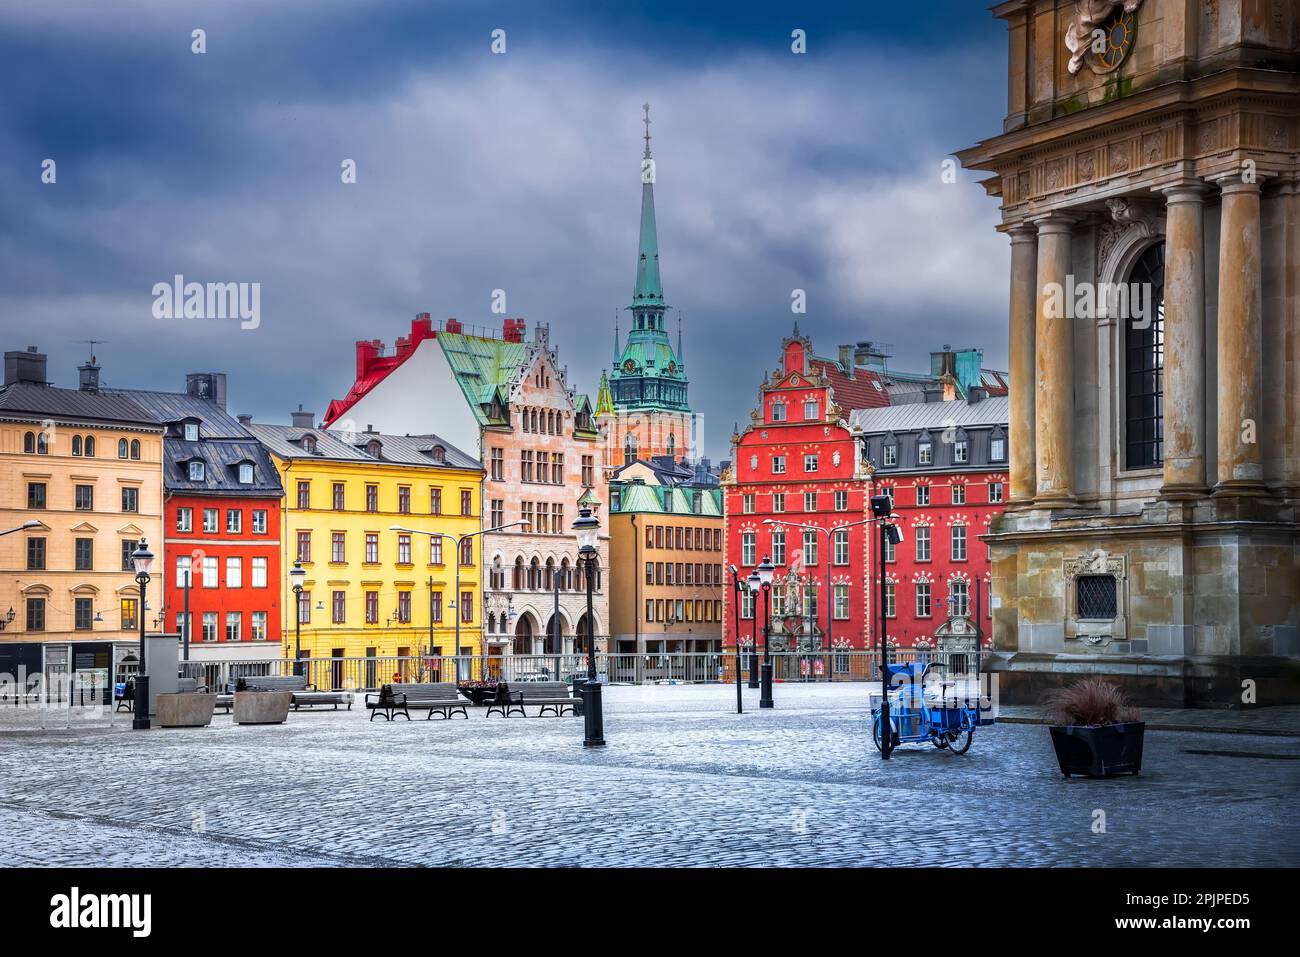 Stockholm, Sweden. Charming Riddarholmen Square and Gamla Stan shrouded in a cloudy twilight, scenic atmosphere for travelers. Stock Photo